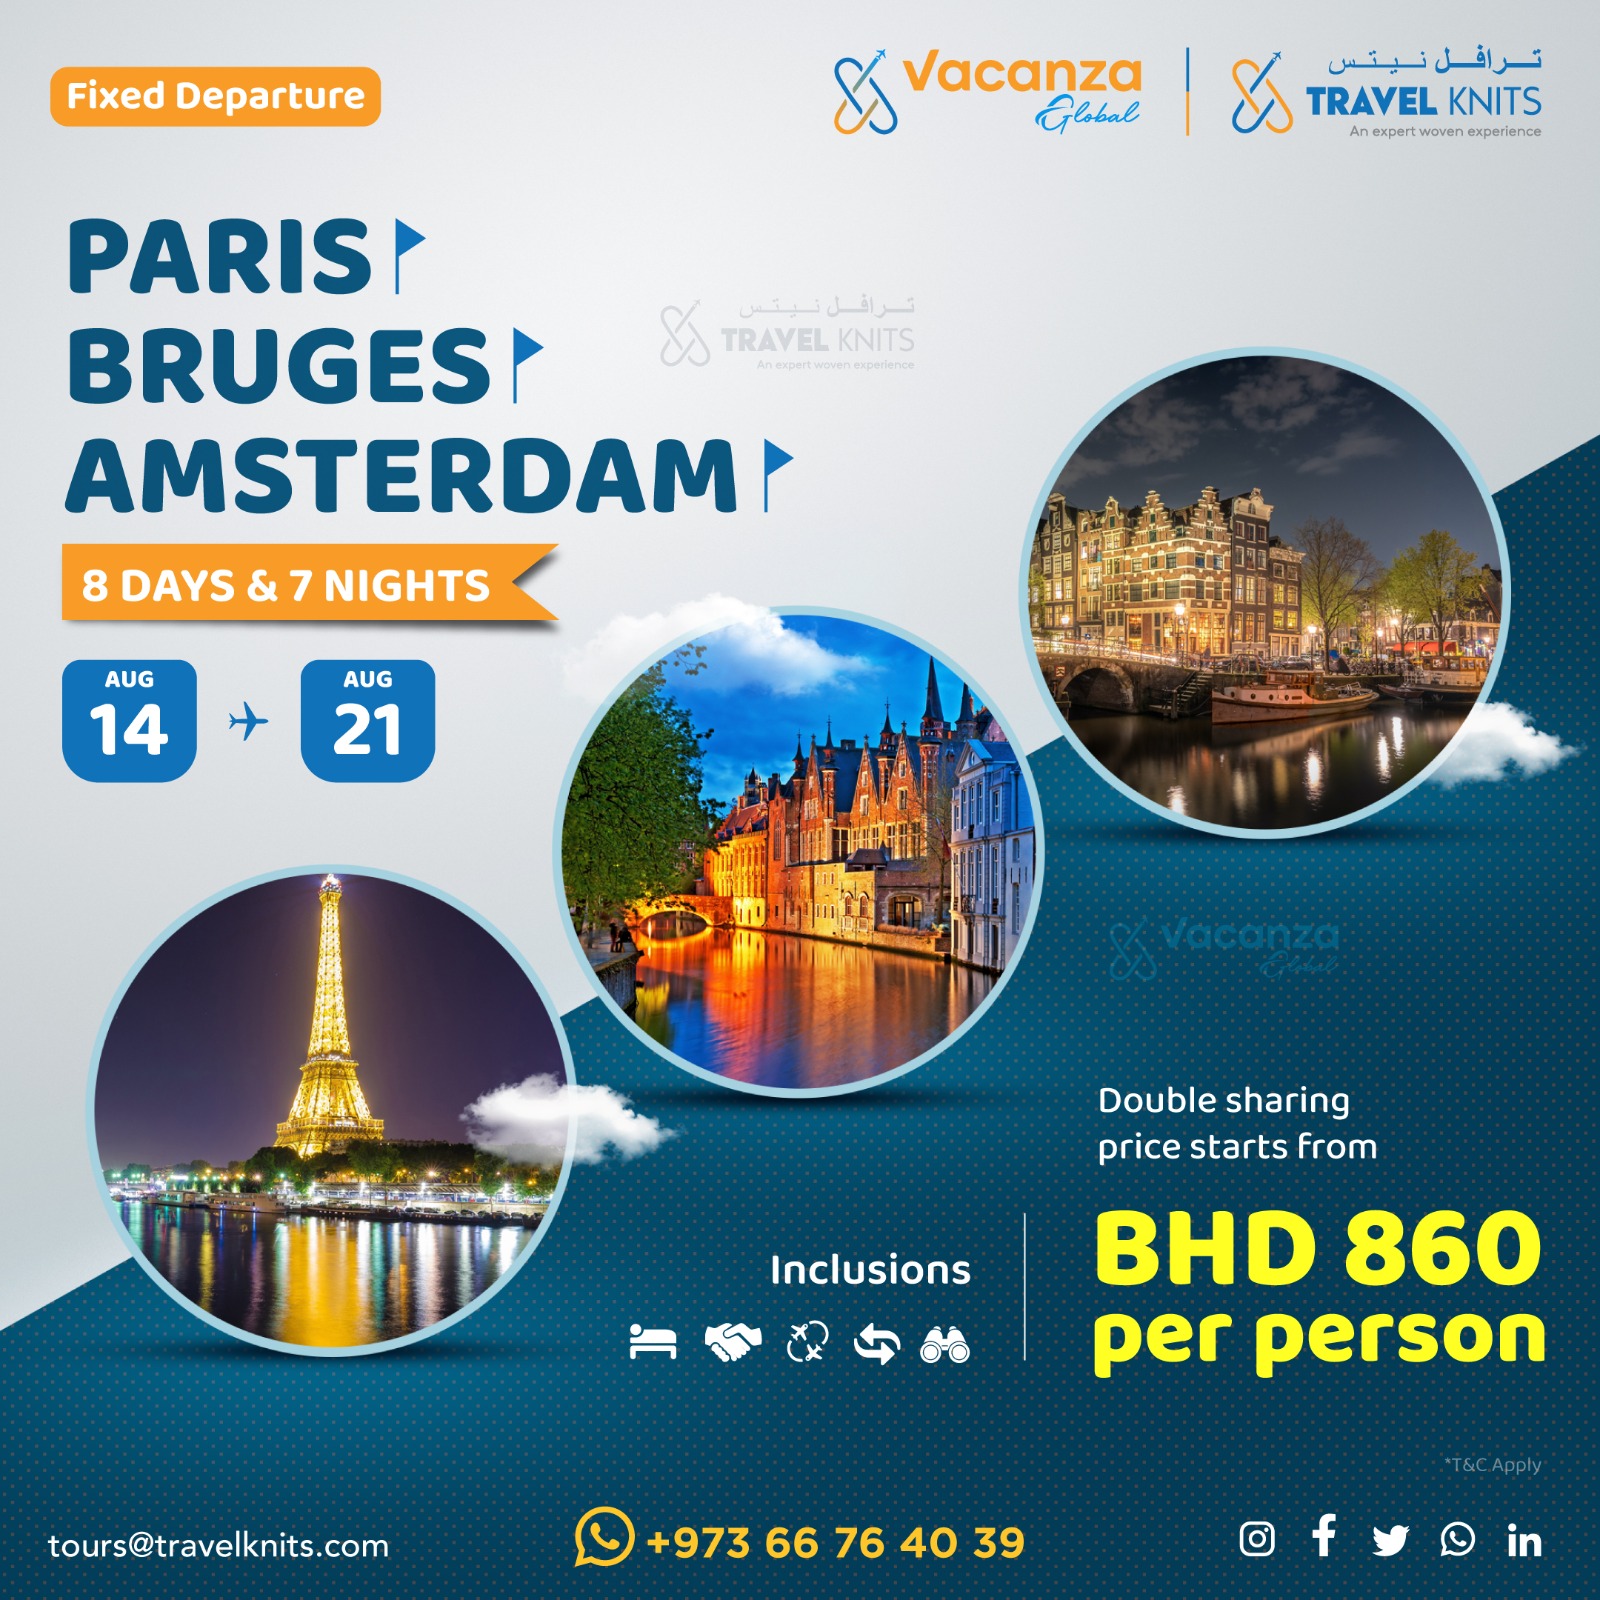 Paris bruges amsterdam Tour Packages - Book honeymoon ,family,adventure tour packages to Paris bruges amsterdam |Travel Knits